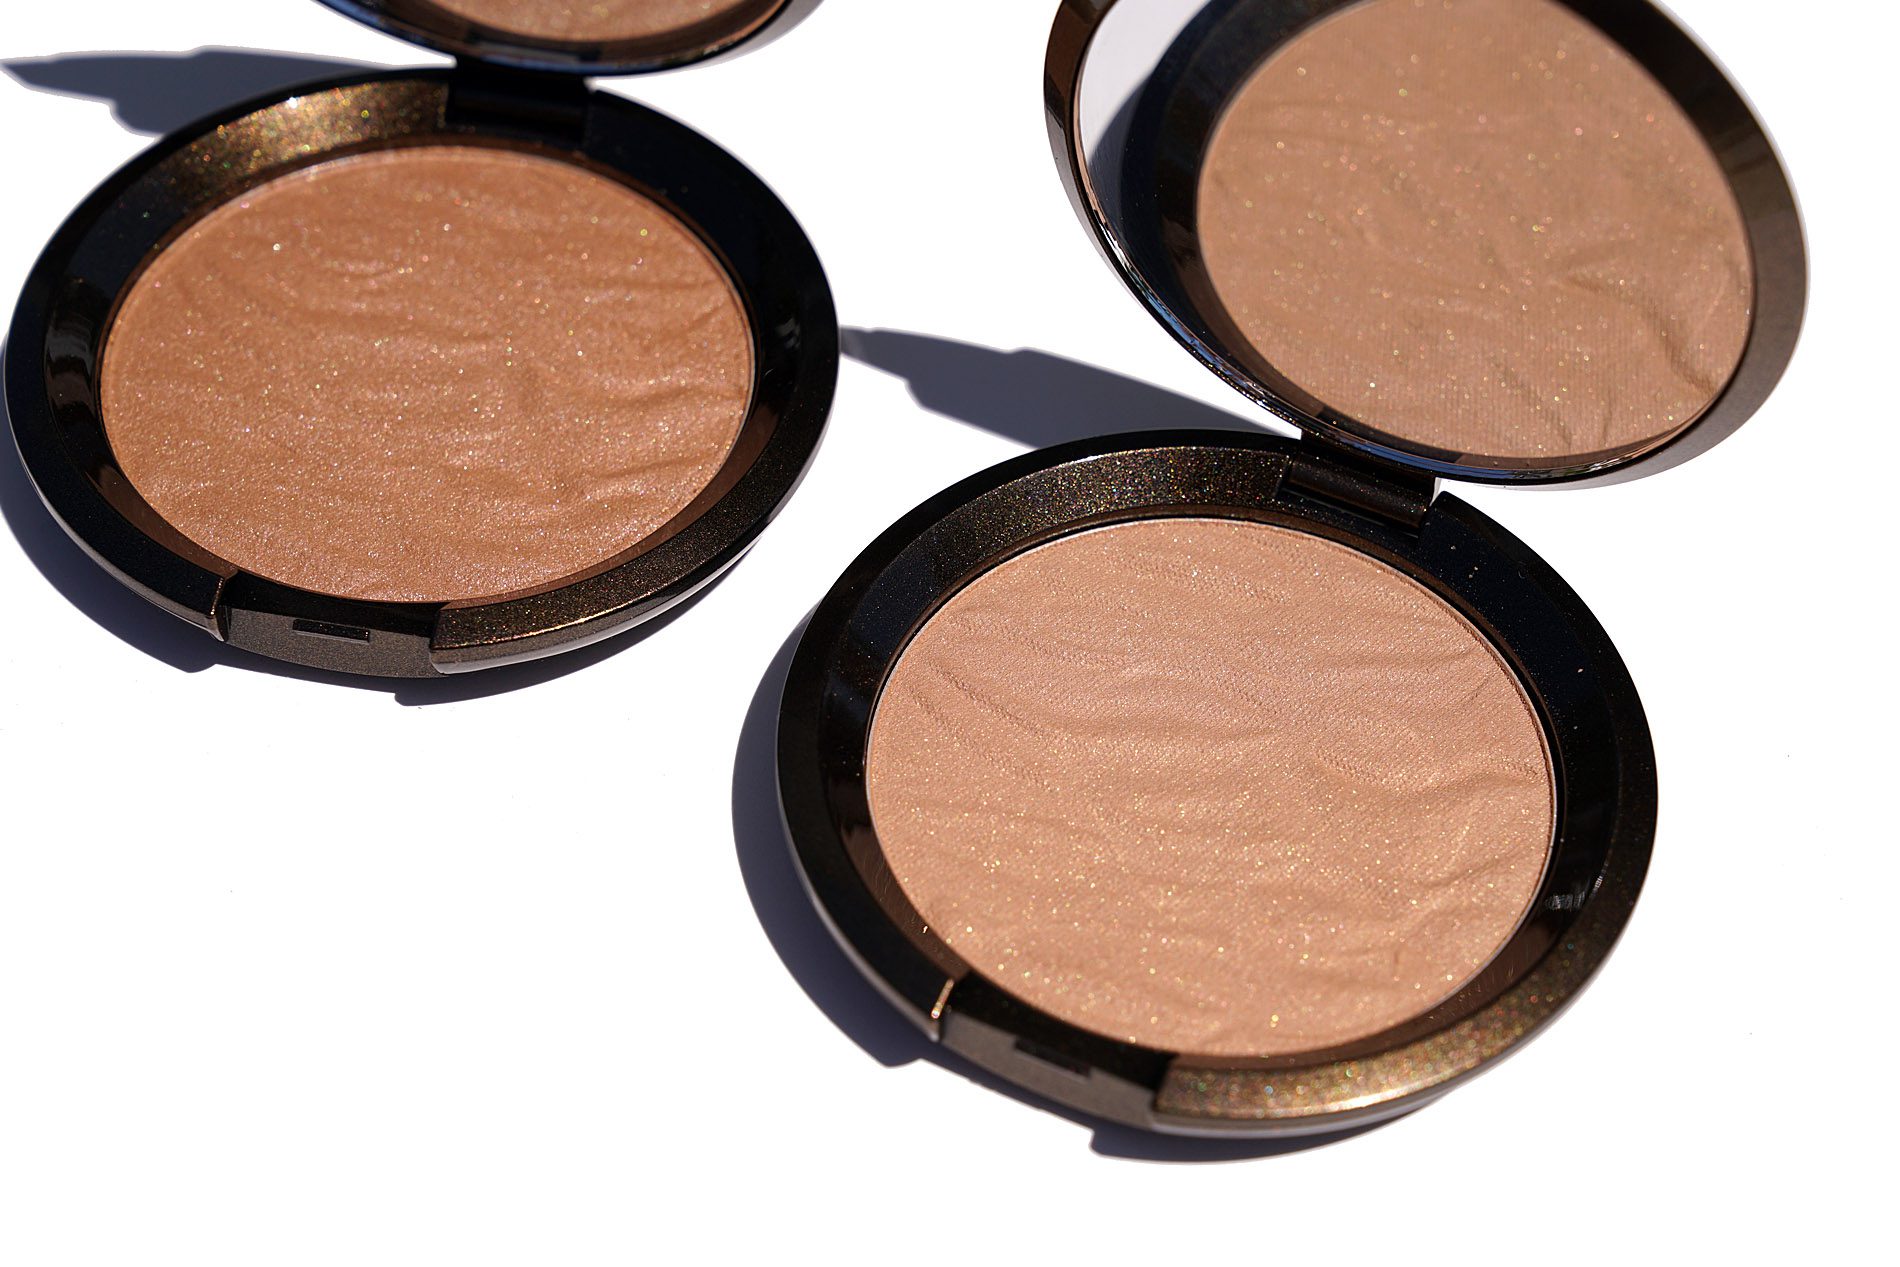 Becca Sunlit Bronzers Review and Swatches.